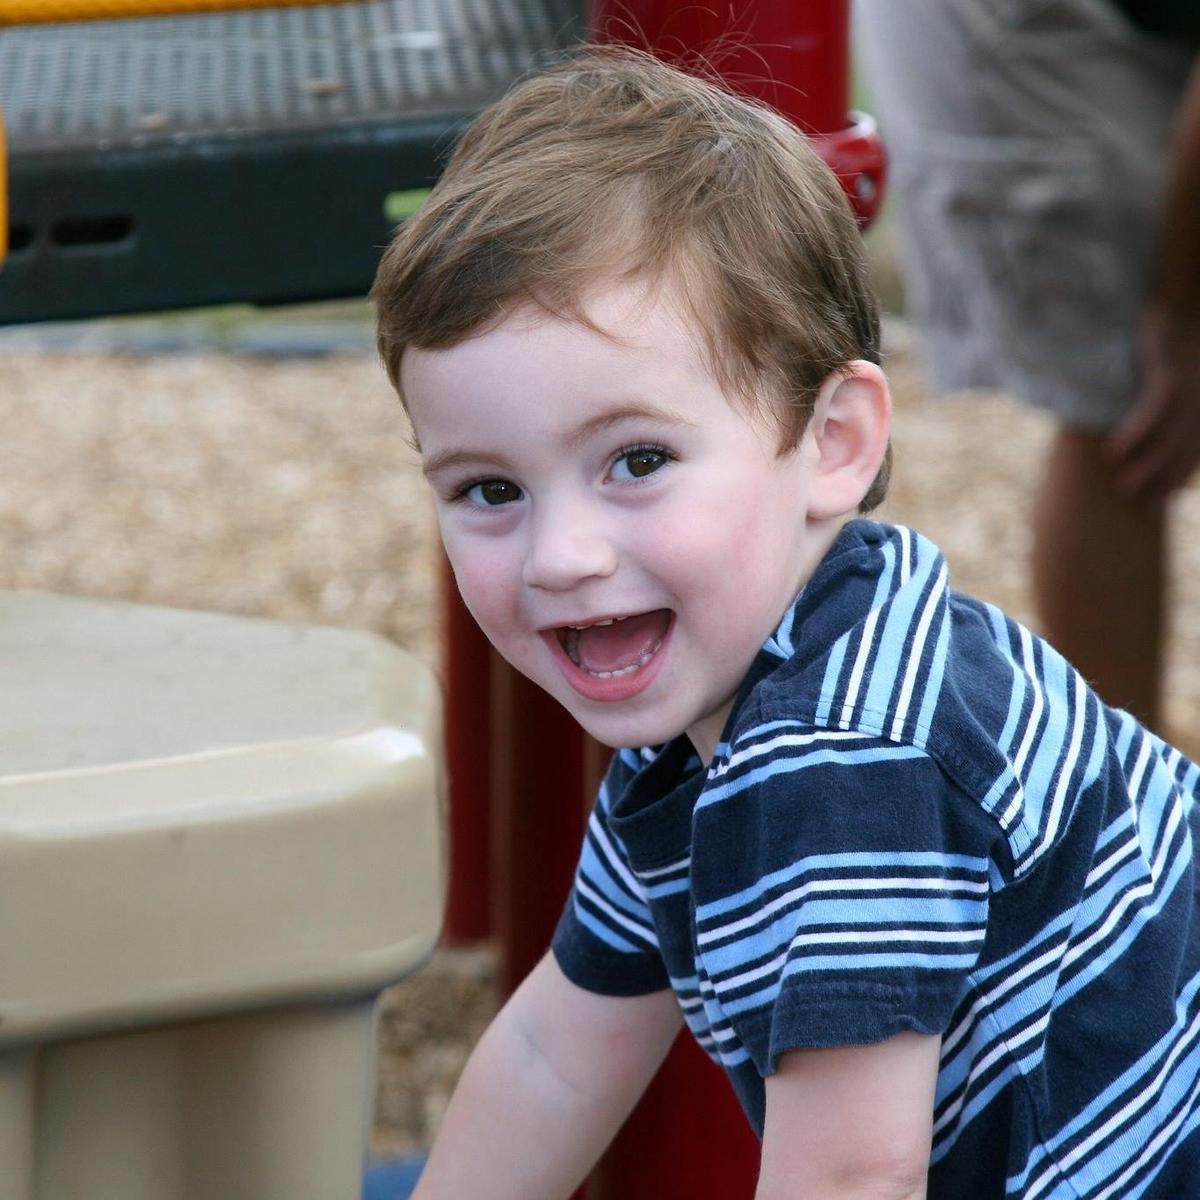 Three-year-old Ethan lost his life to an accident. (Courtesy of <a href="https://www.facebook.com/gmichaelrobinson">Michael Robinson</a>)